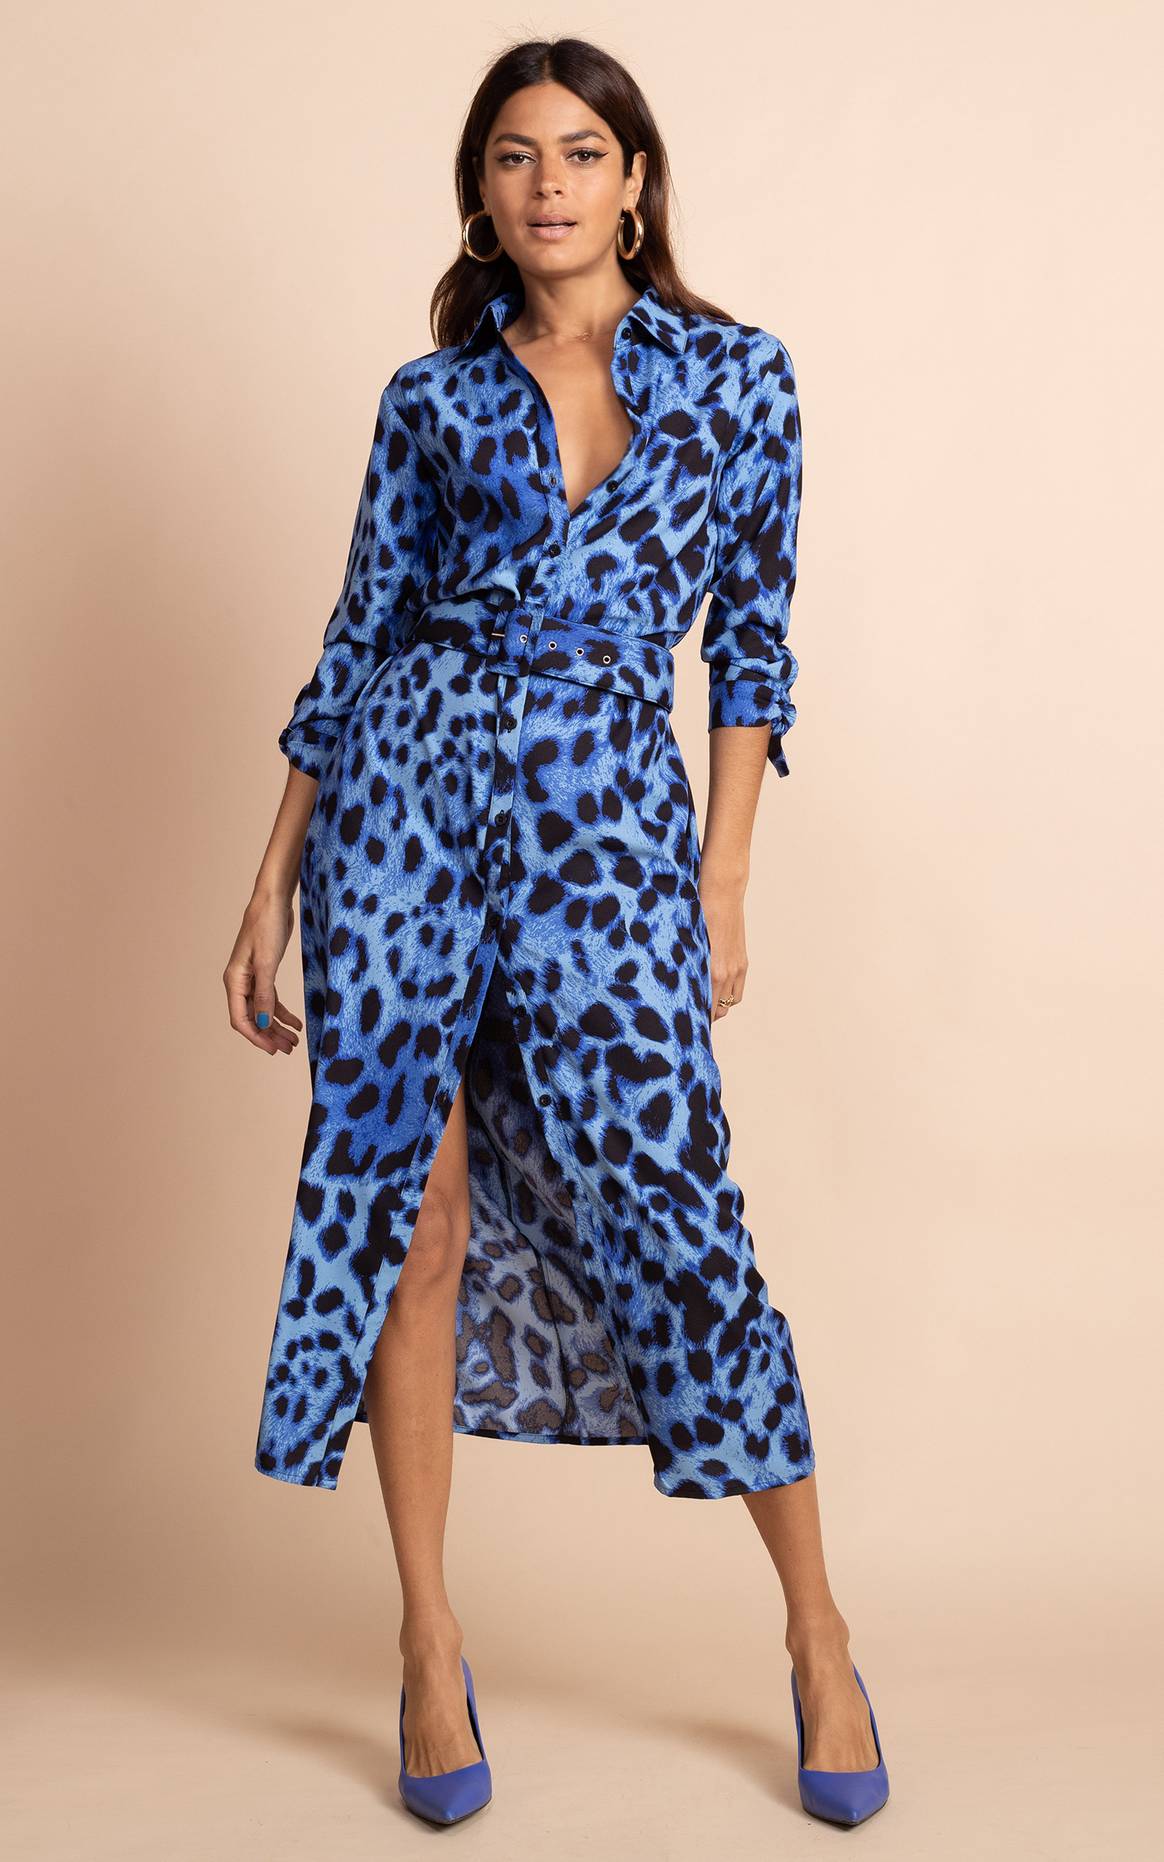 Dancing Leopard, Women SS22 Collection, courtesy of the brand